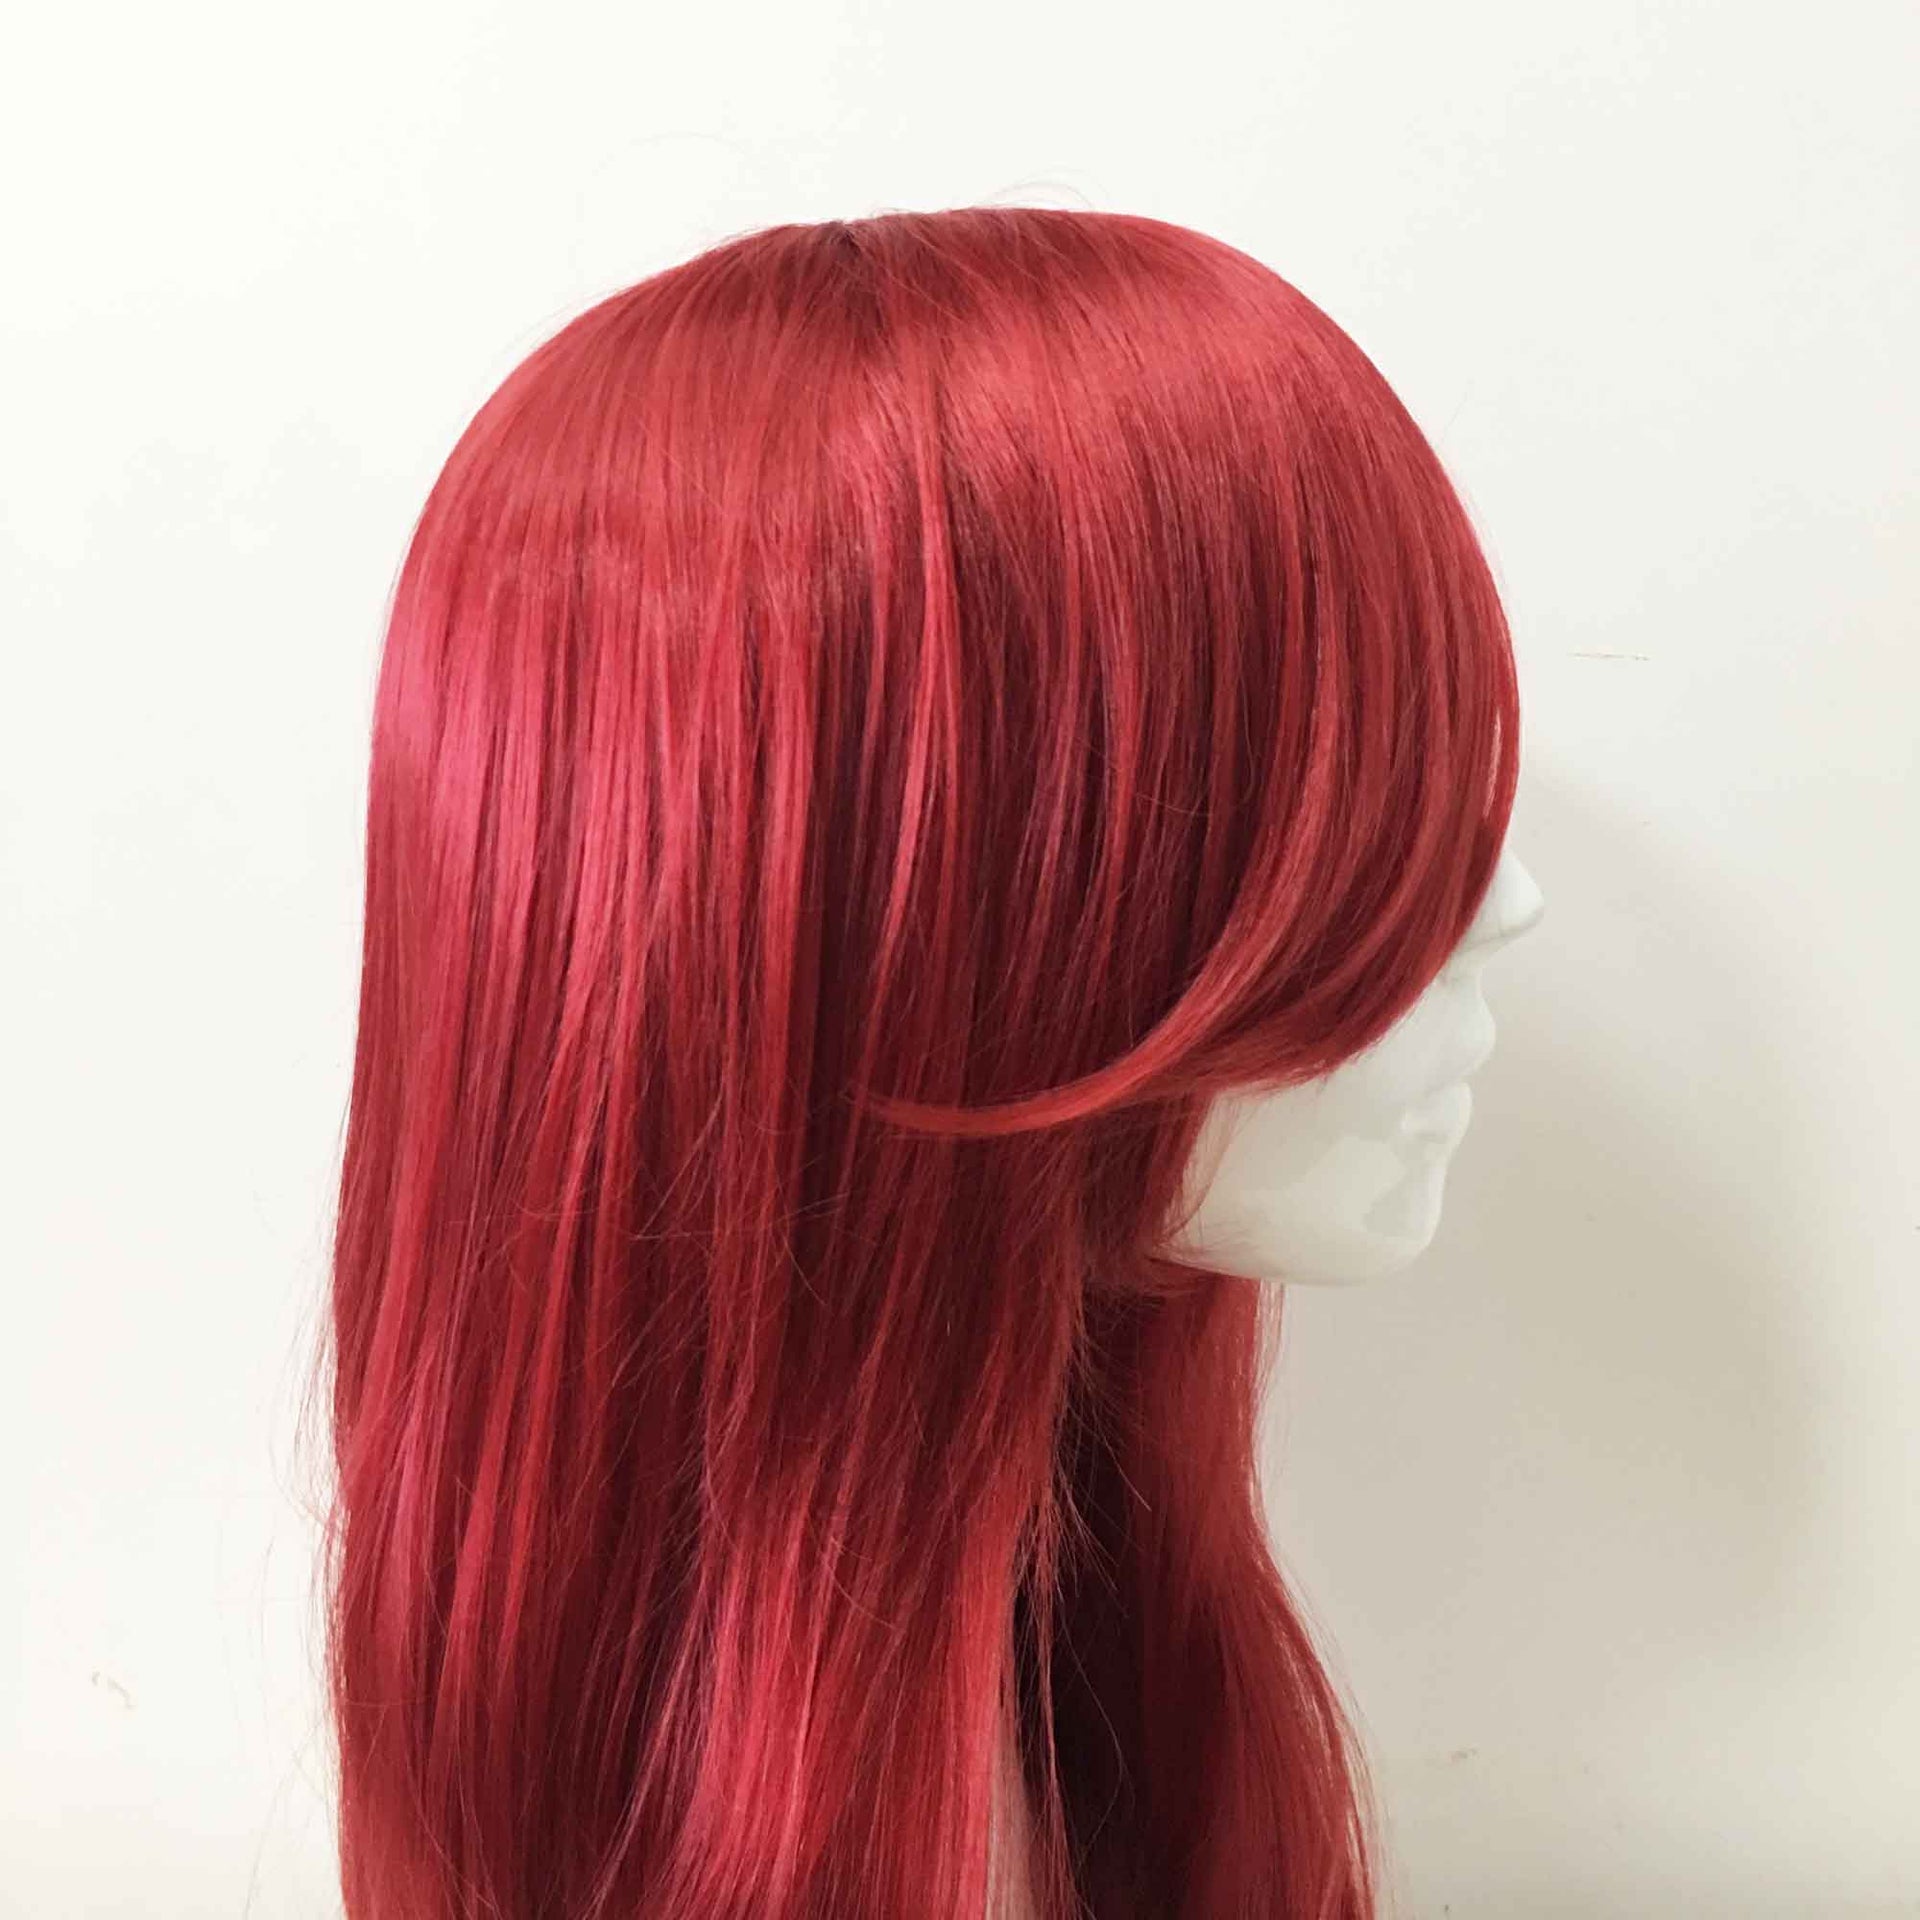 nevermindyrhead Women Red Long Curly Side Swept Bangs Cosplay Wig